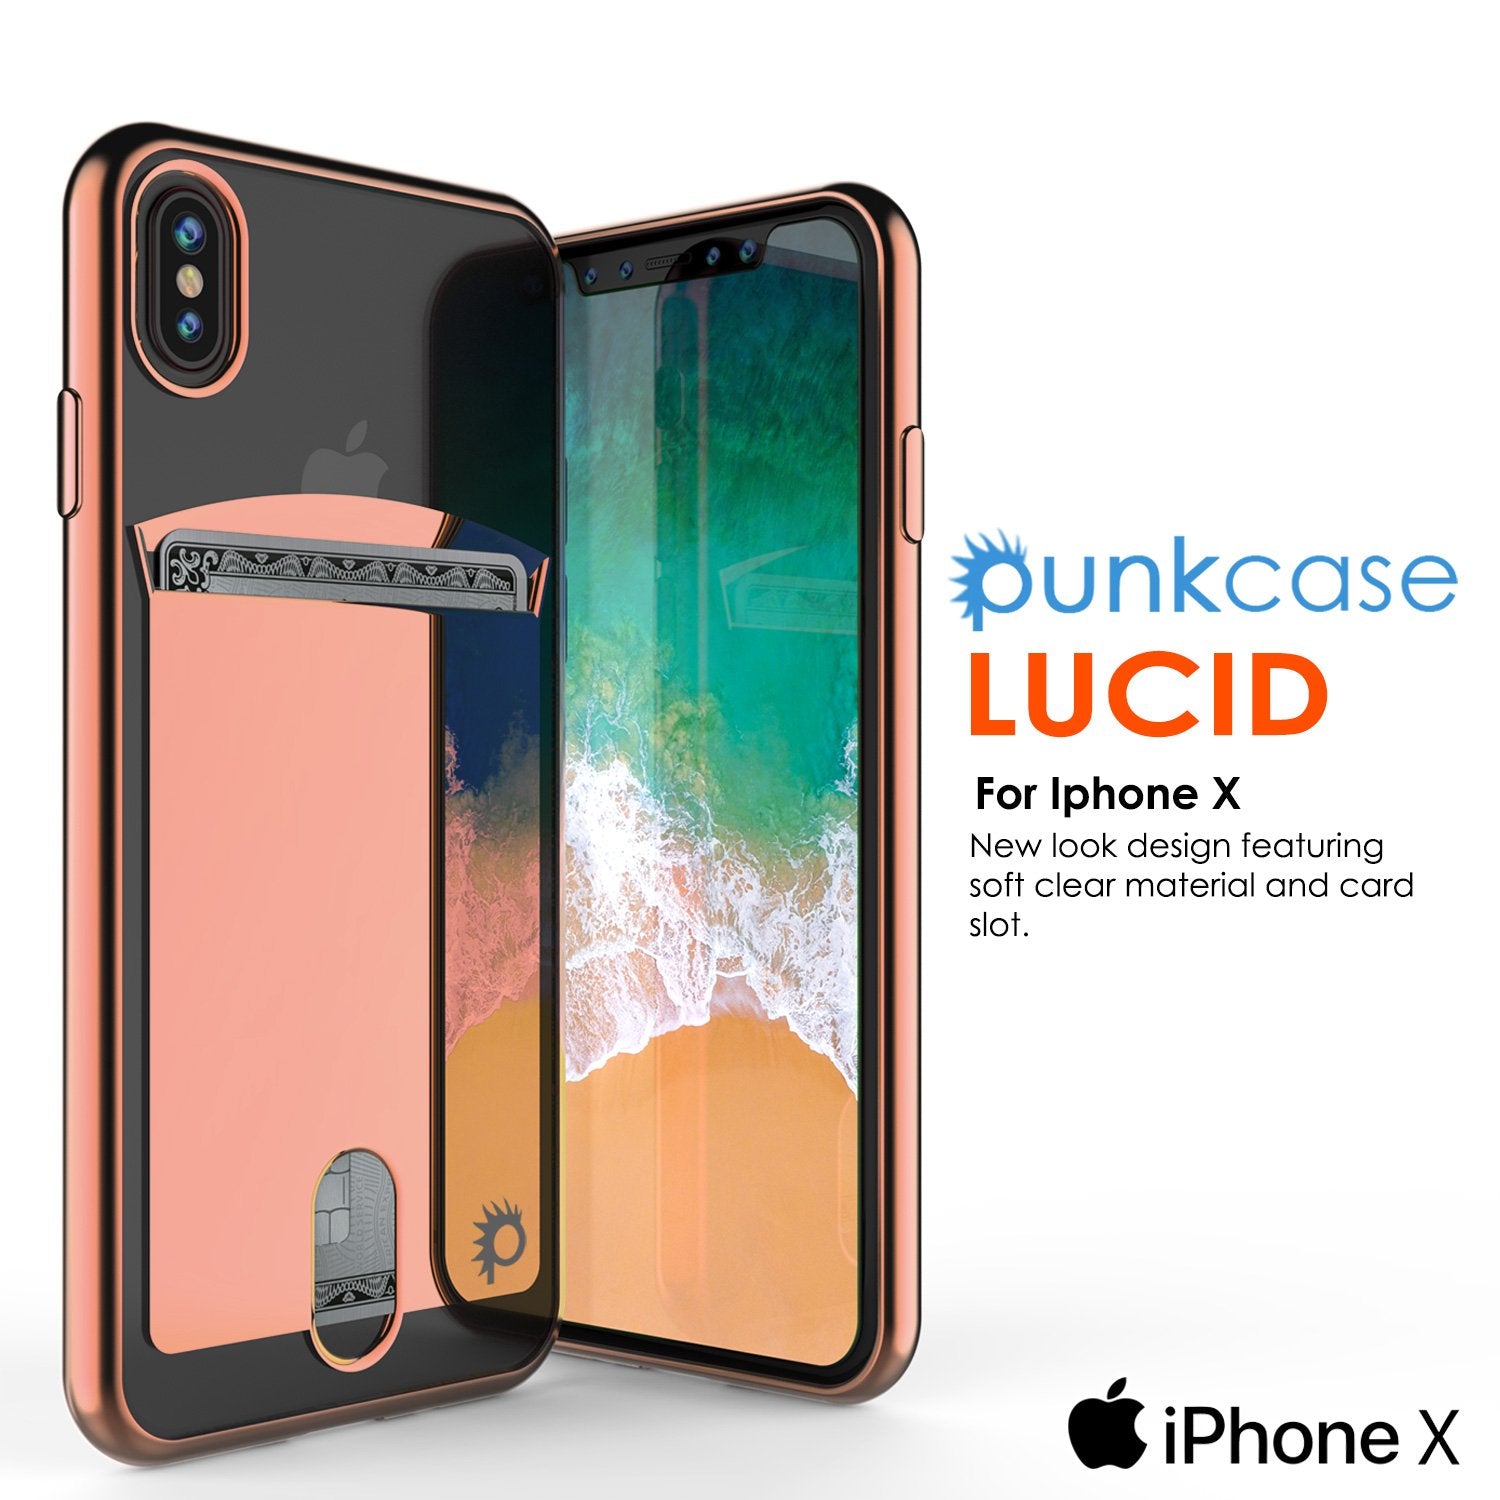 Punkcase iPhone X LUCID Series Dual Layer Armor Cover | Rose Pink